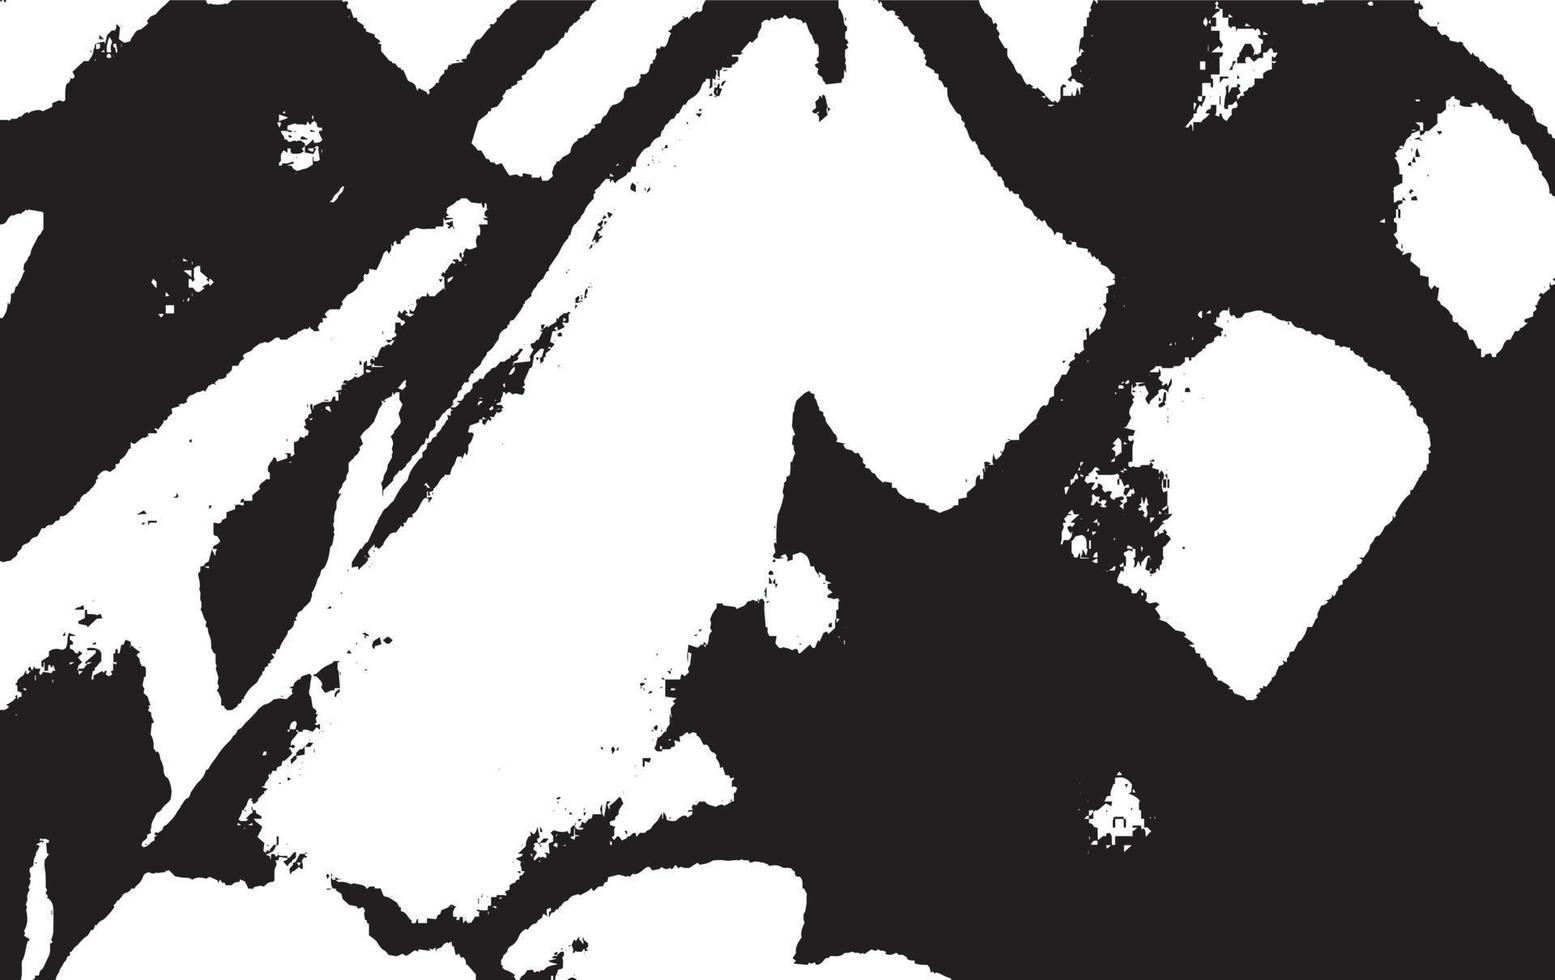 Black and white grunge texture vector